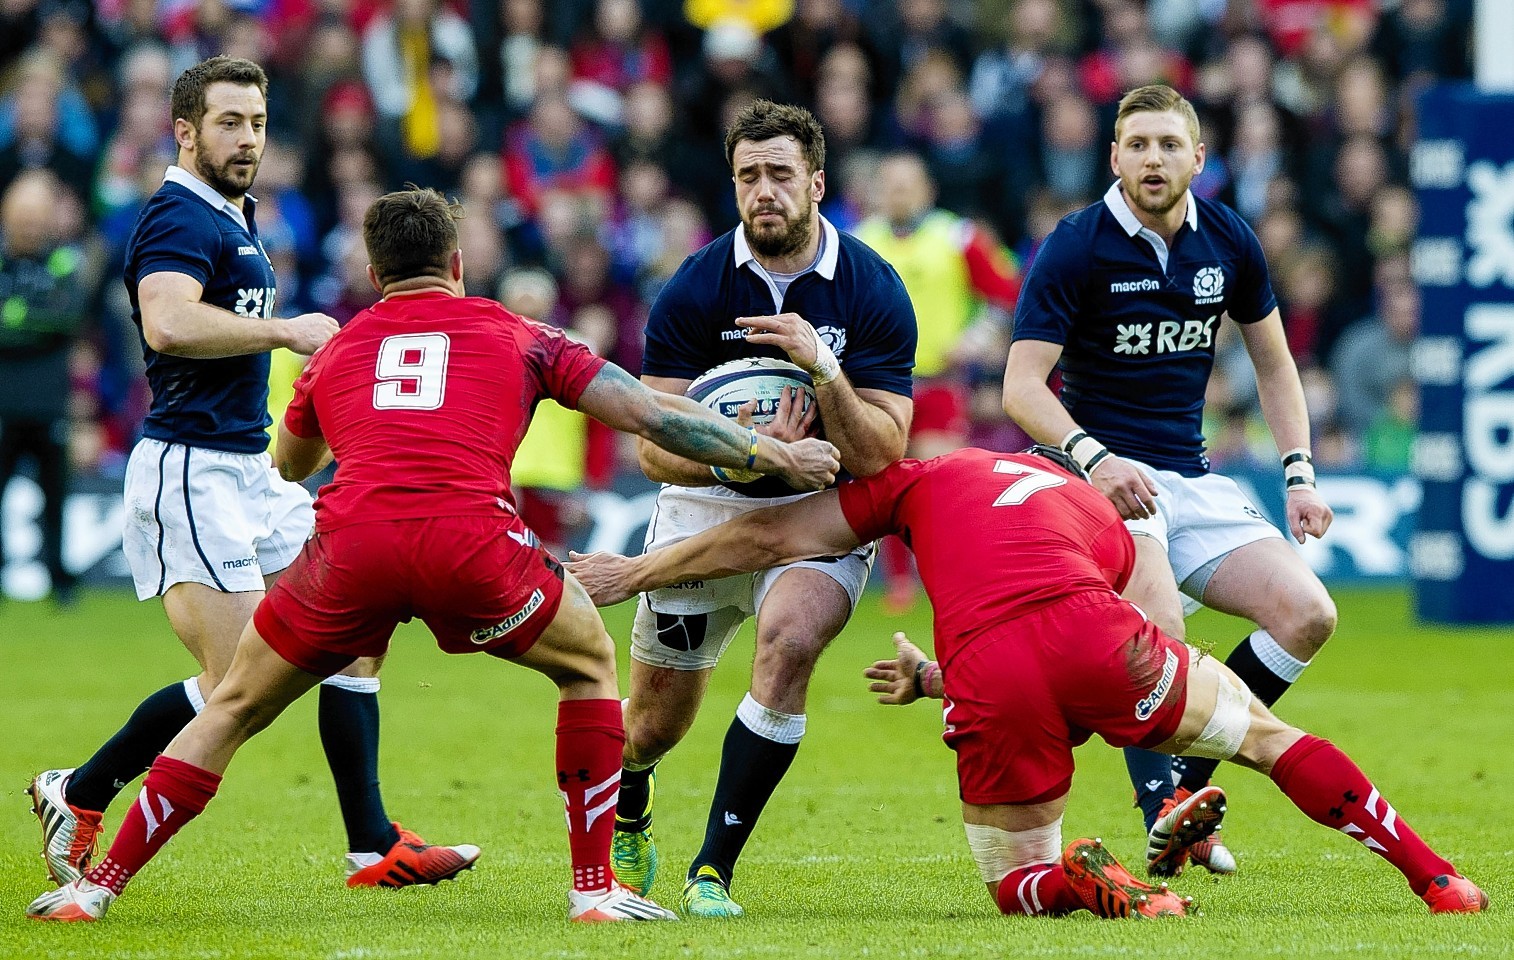 The Welsh international feared his chances were over after defeat to Scotland in the 6 Nations